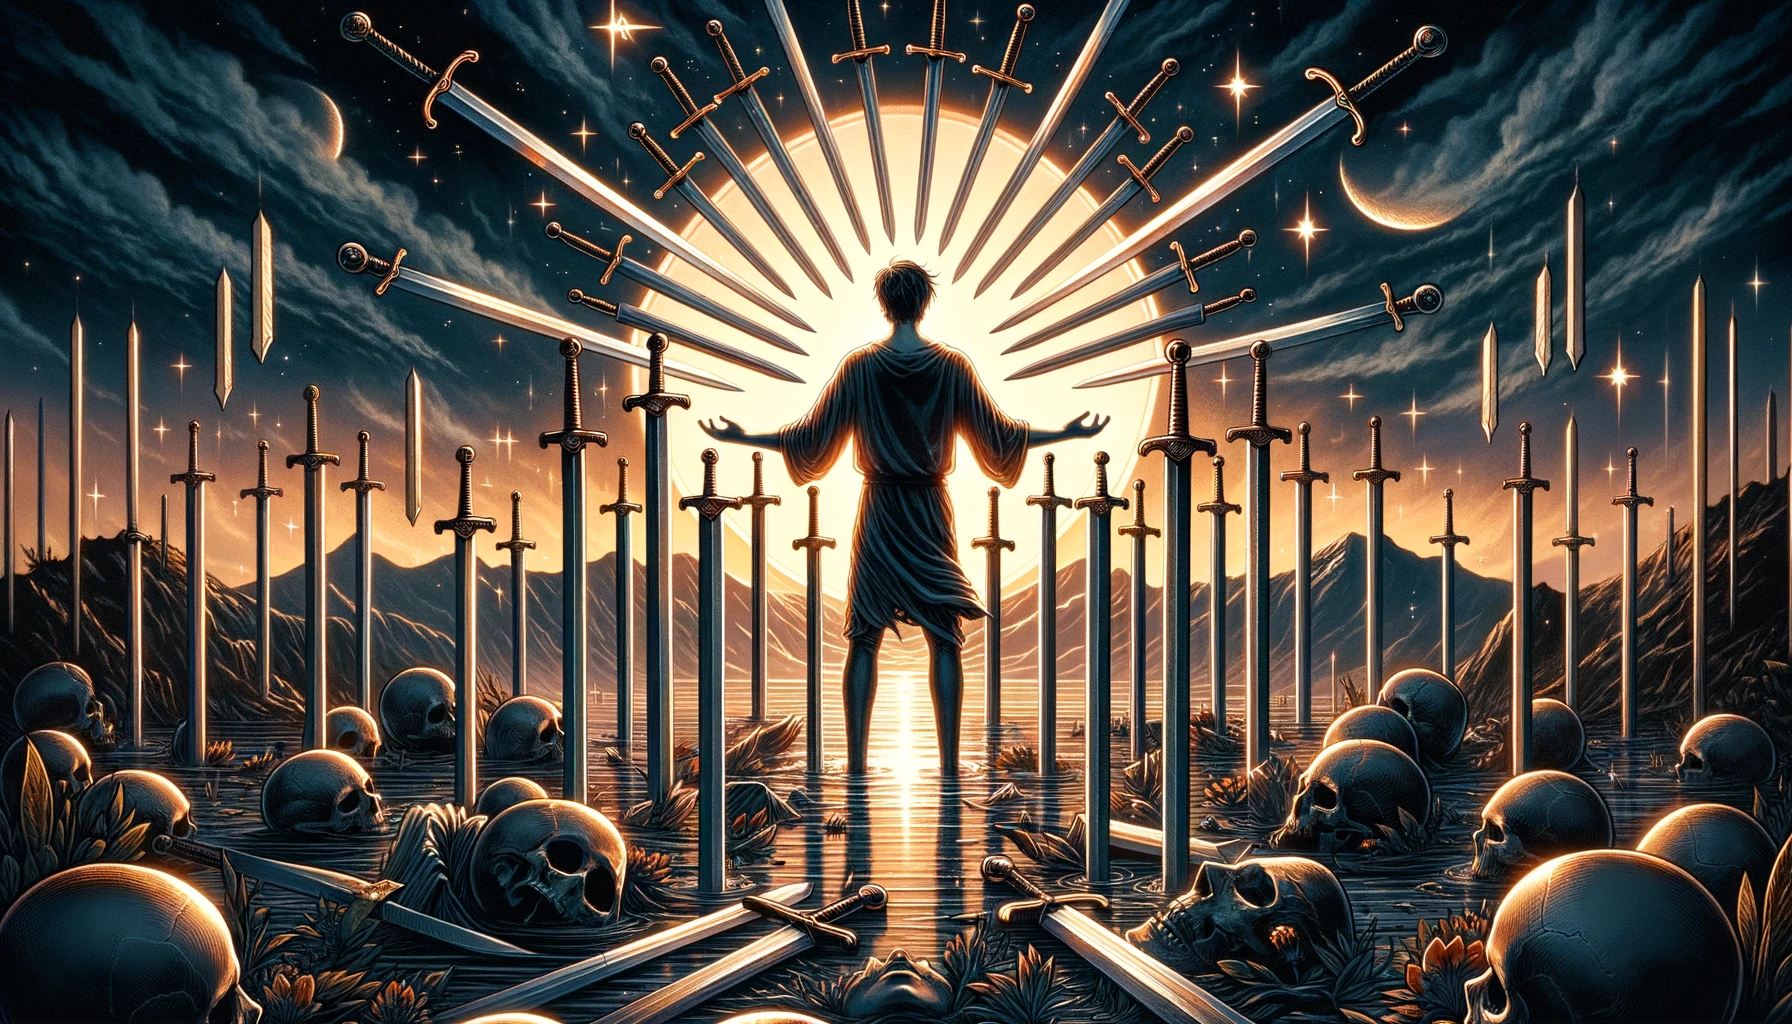 "The image portrays the longing to overcome fears and anxieties, symbolized by a figure amidst nine swords, transitioning from darkness to the first light of dawn, indicating hope, resilience, and the start of a journey towards healing and inner peace."